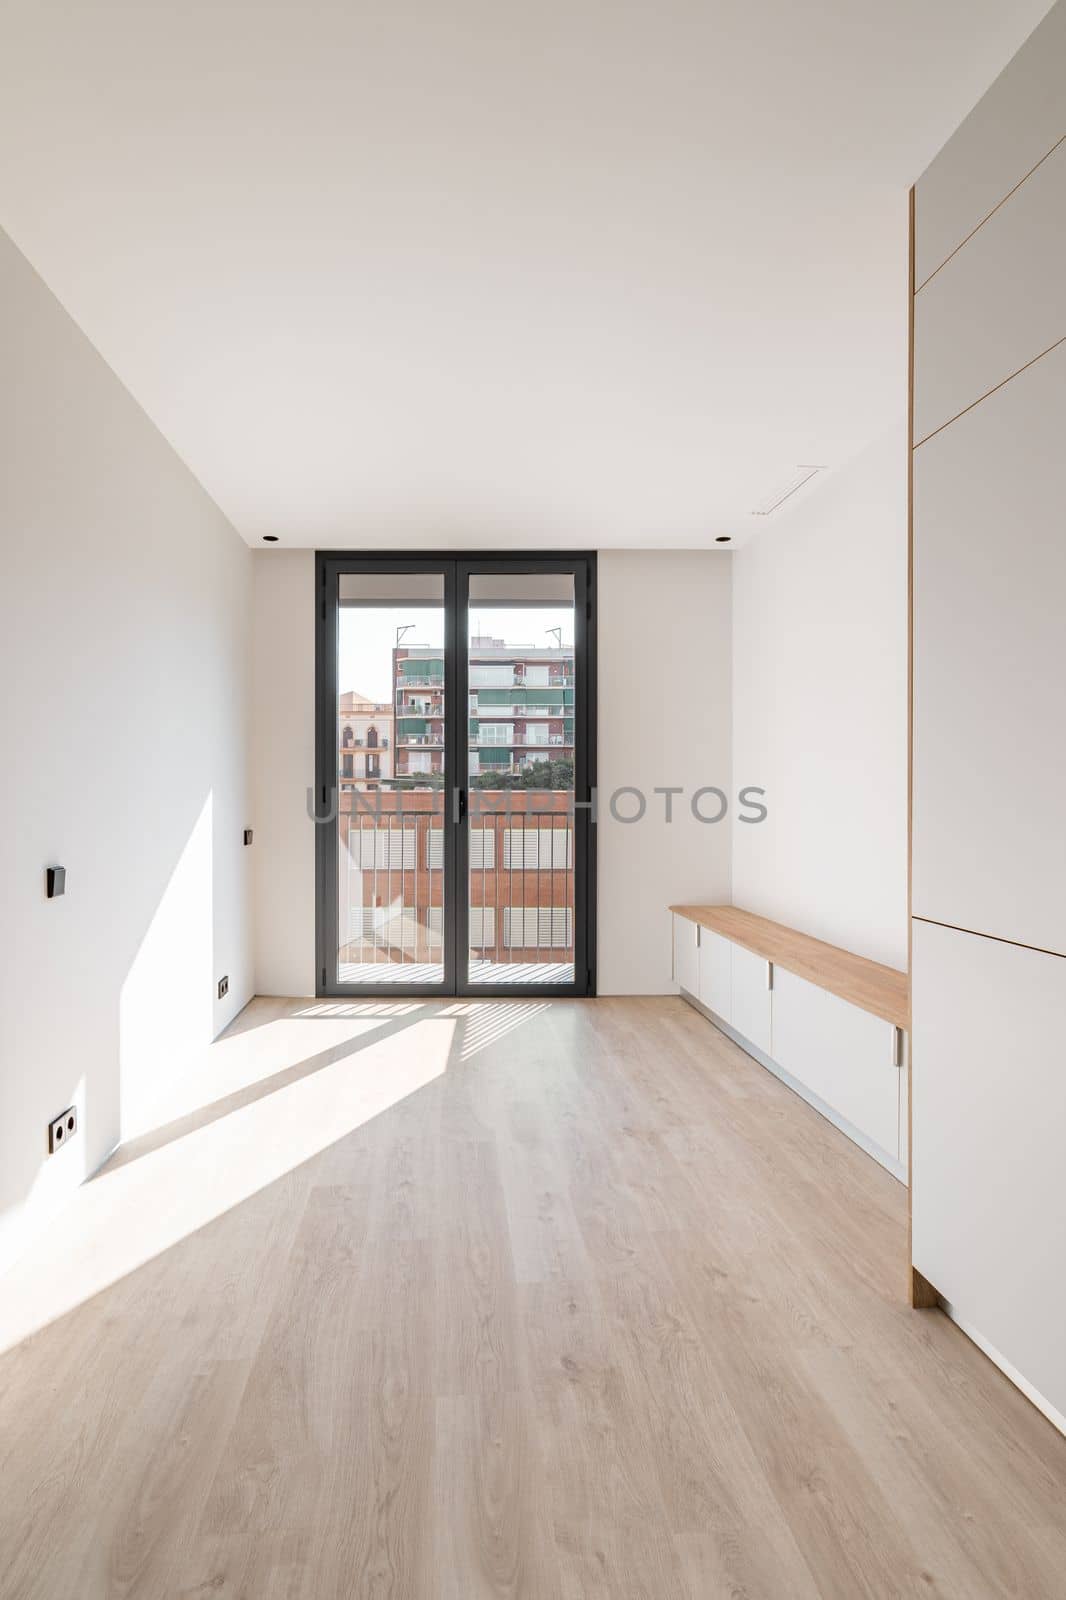 Direct view of black metal framed glass sliding doors at end of an empty bright clean room. Doors leading to spacious balcony overlooking neighboring house. Sunlight enters through glass door. by apavlin